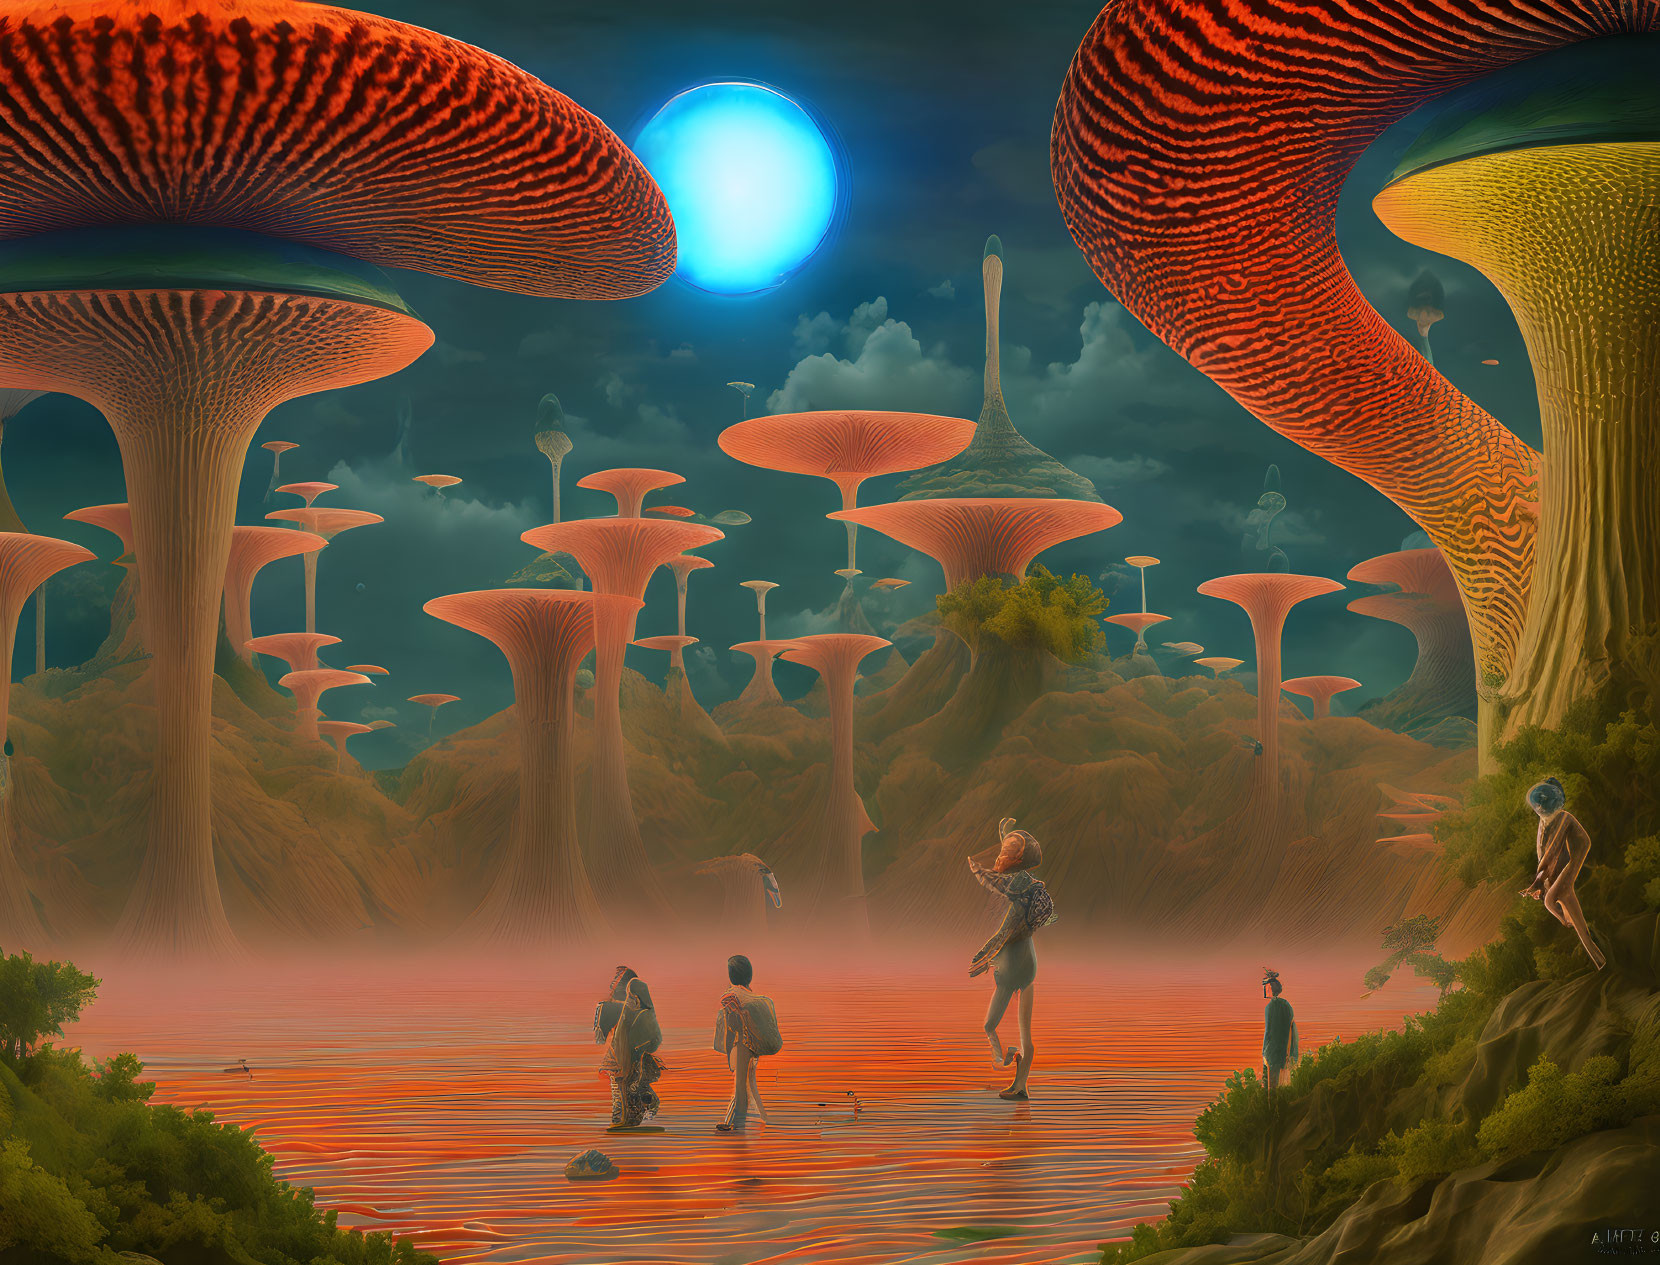 Surreal landscape with giant mushrooms, blue sun, and humanoid figures